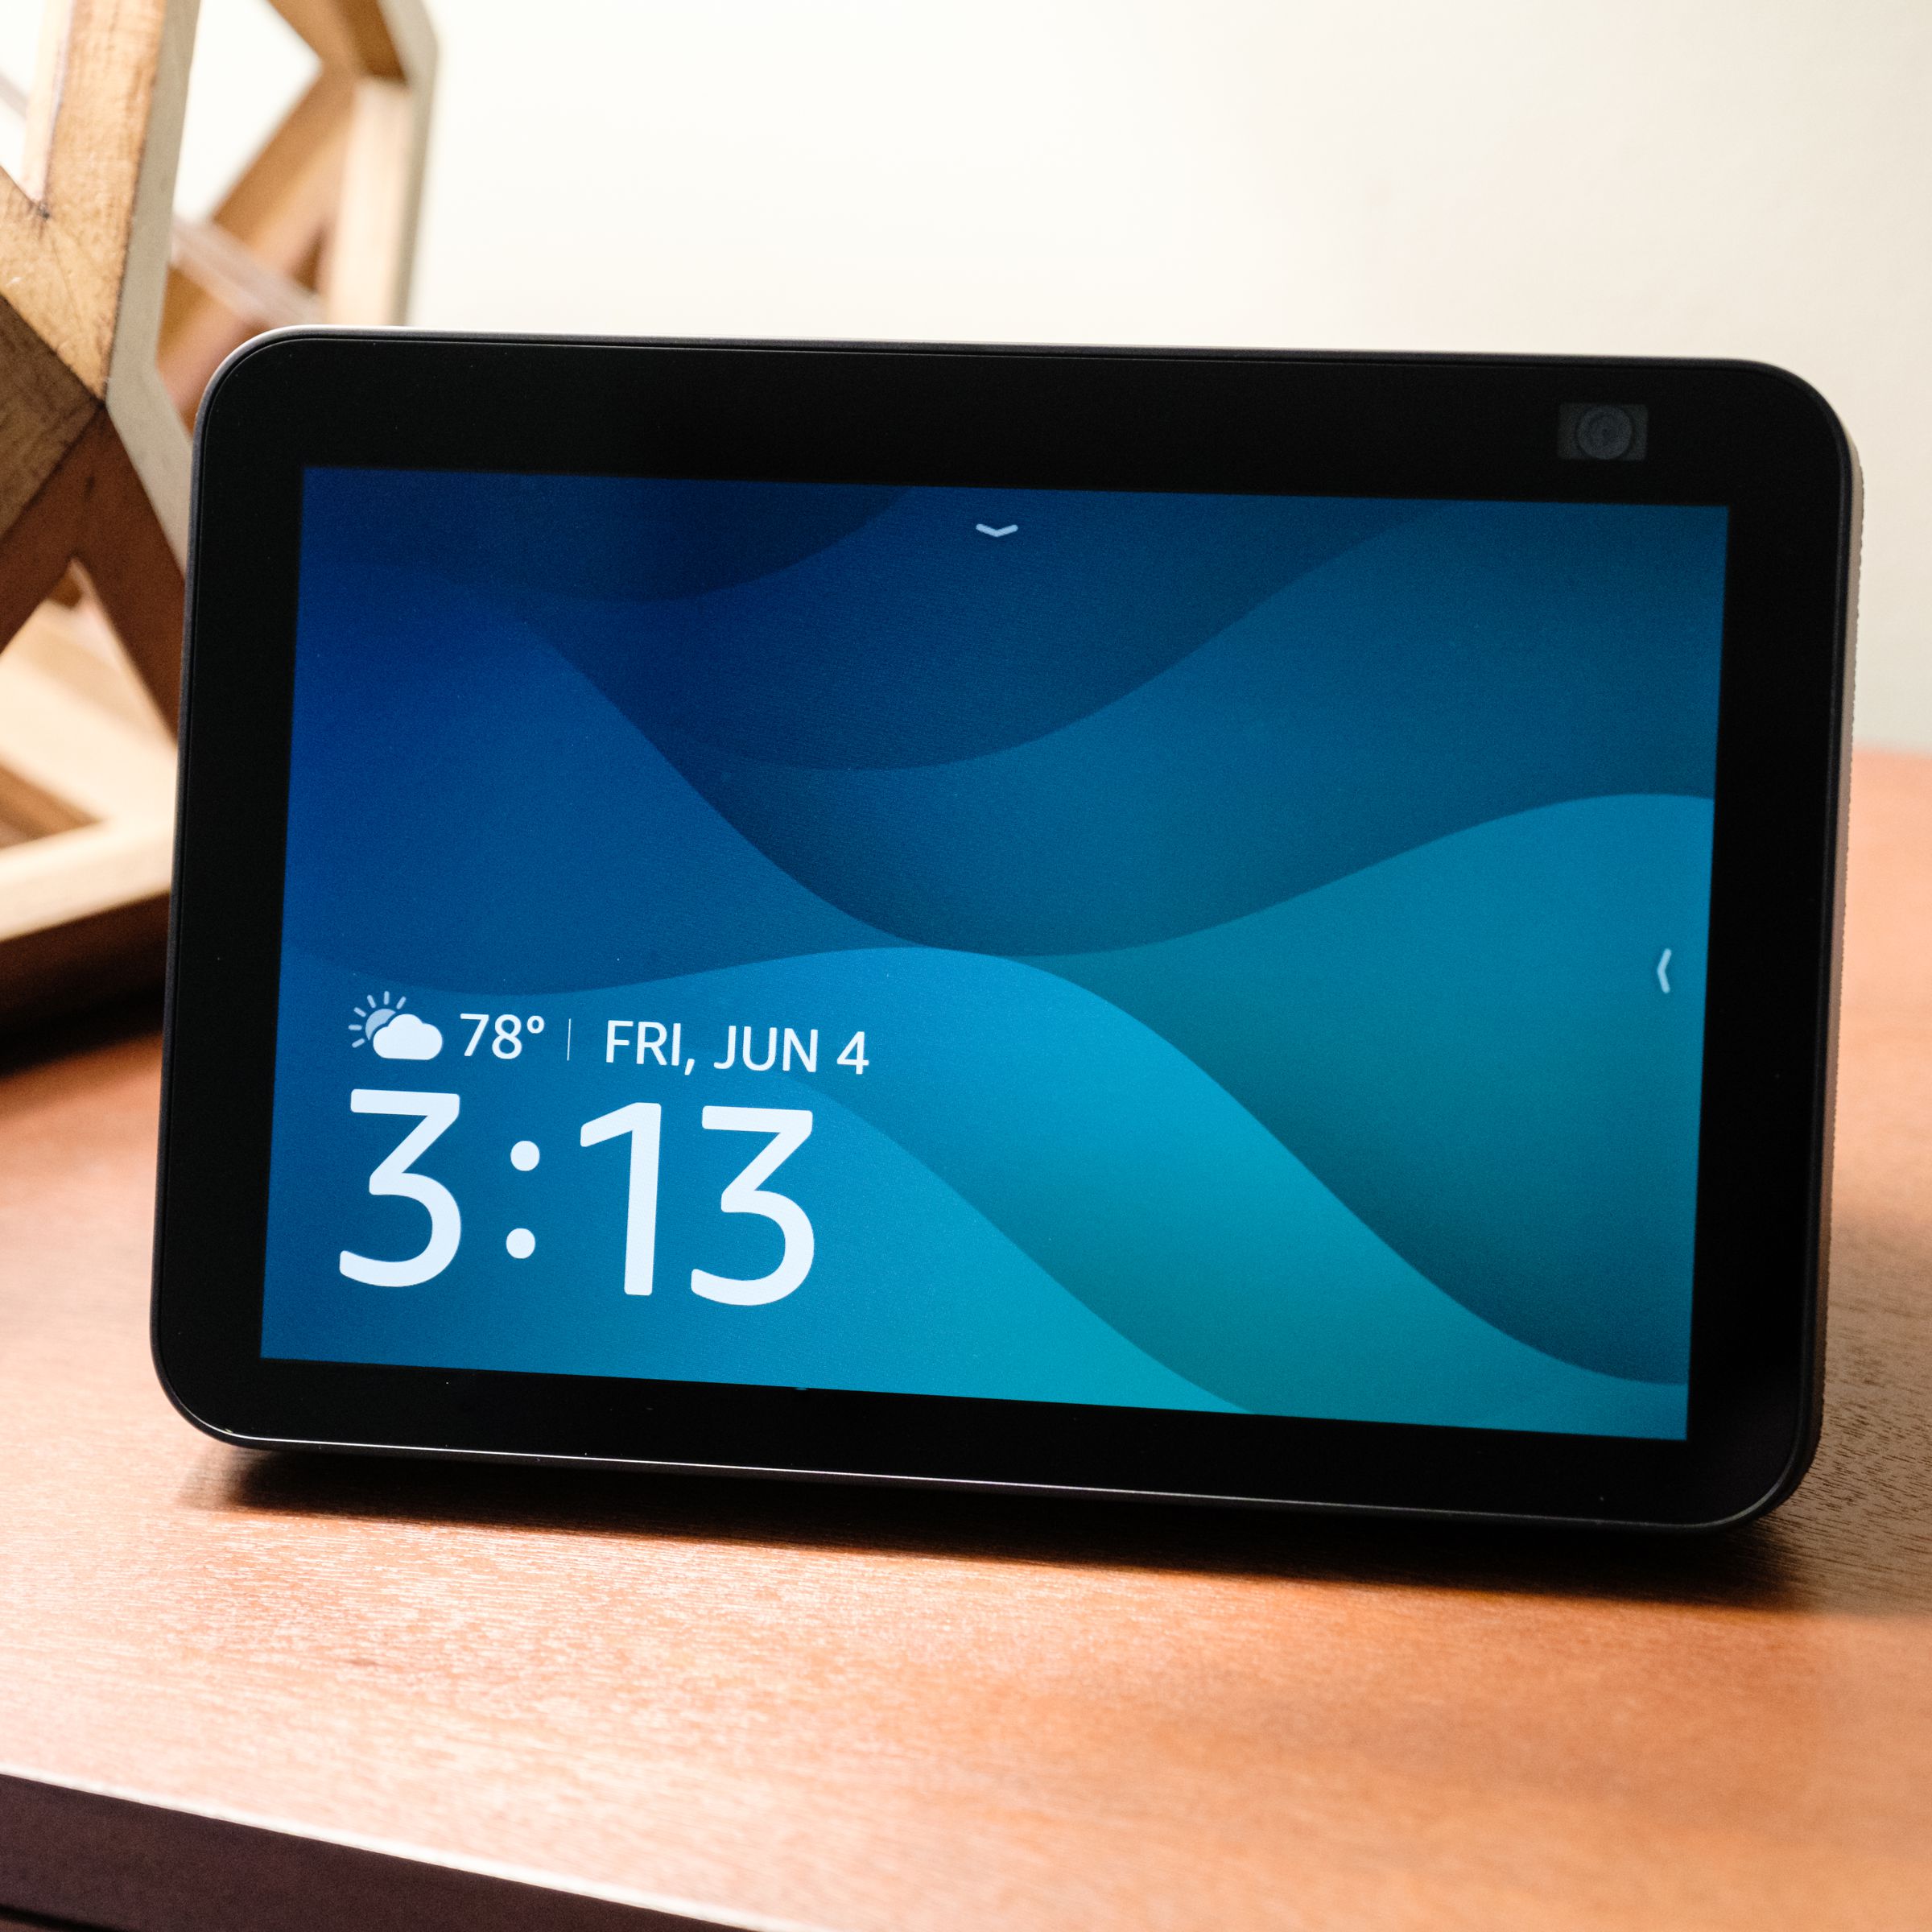 The second generation Echo Show 8 with its main screen exposed and resting on a table.